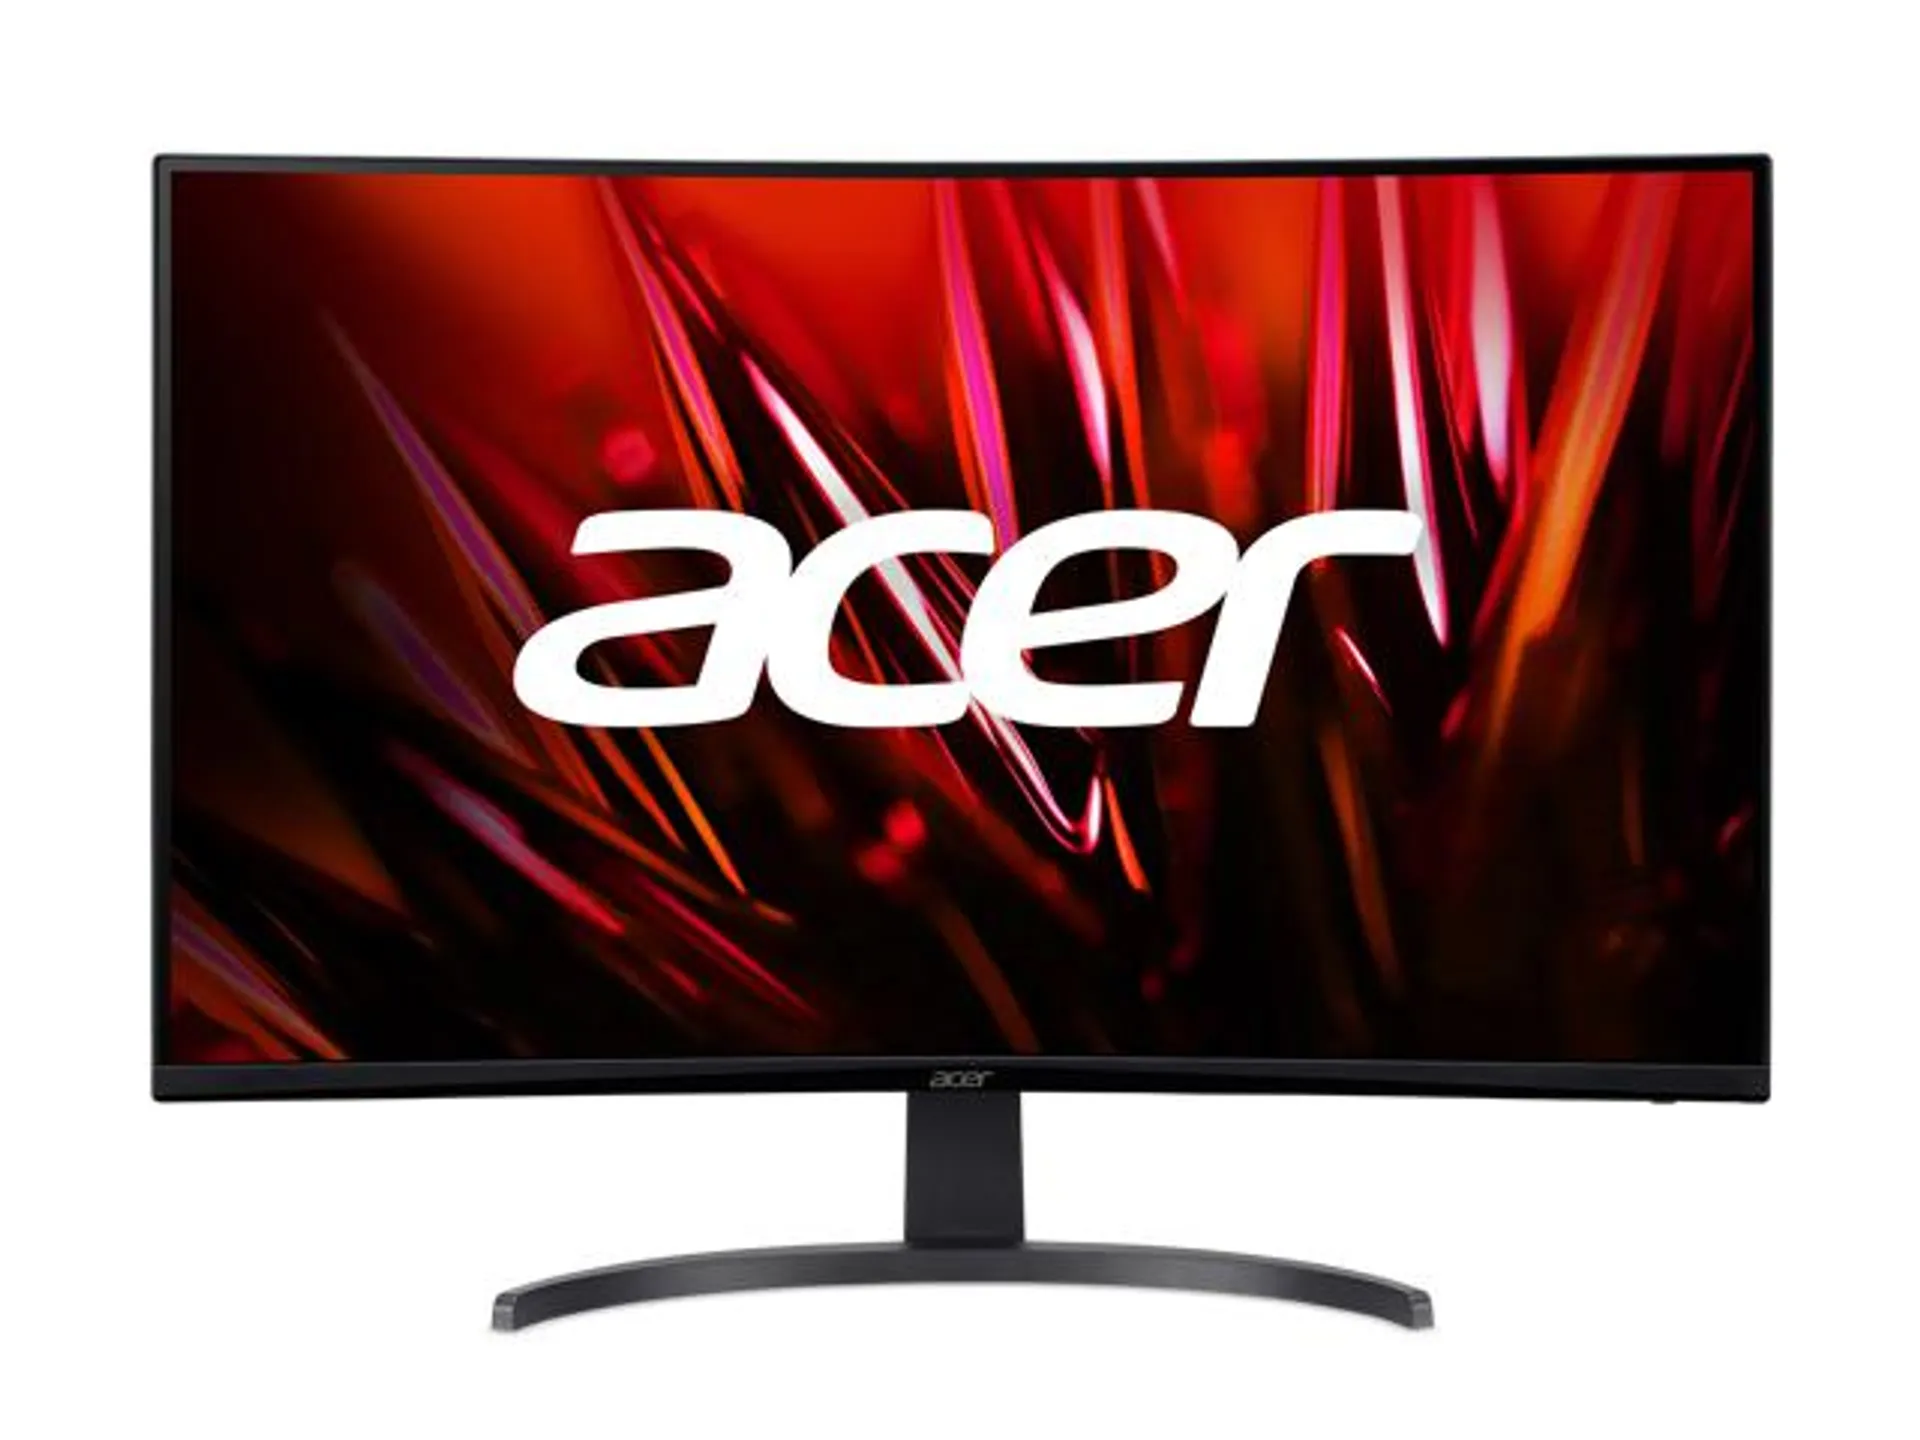 Acer ED320Q XBMIIPX 32.0 Full HD 1920 x 1080 240 Hz HDMI, DisplayPort Built-in Speakers Curved Gaming Monitor